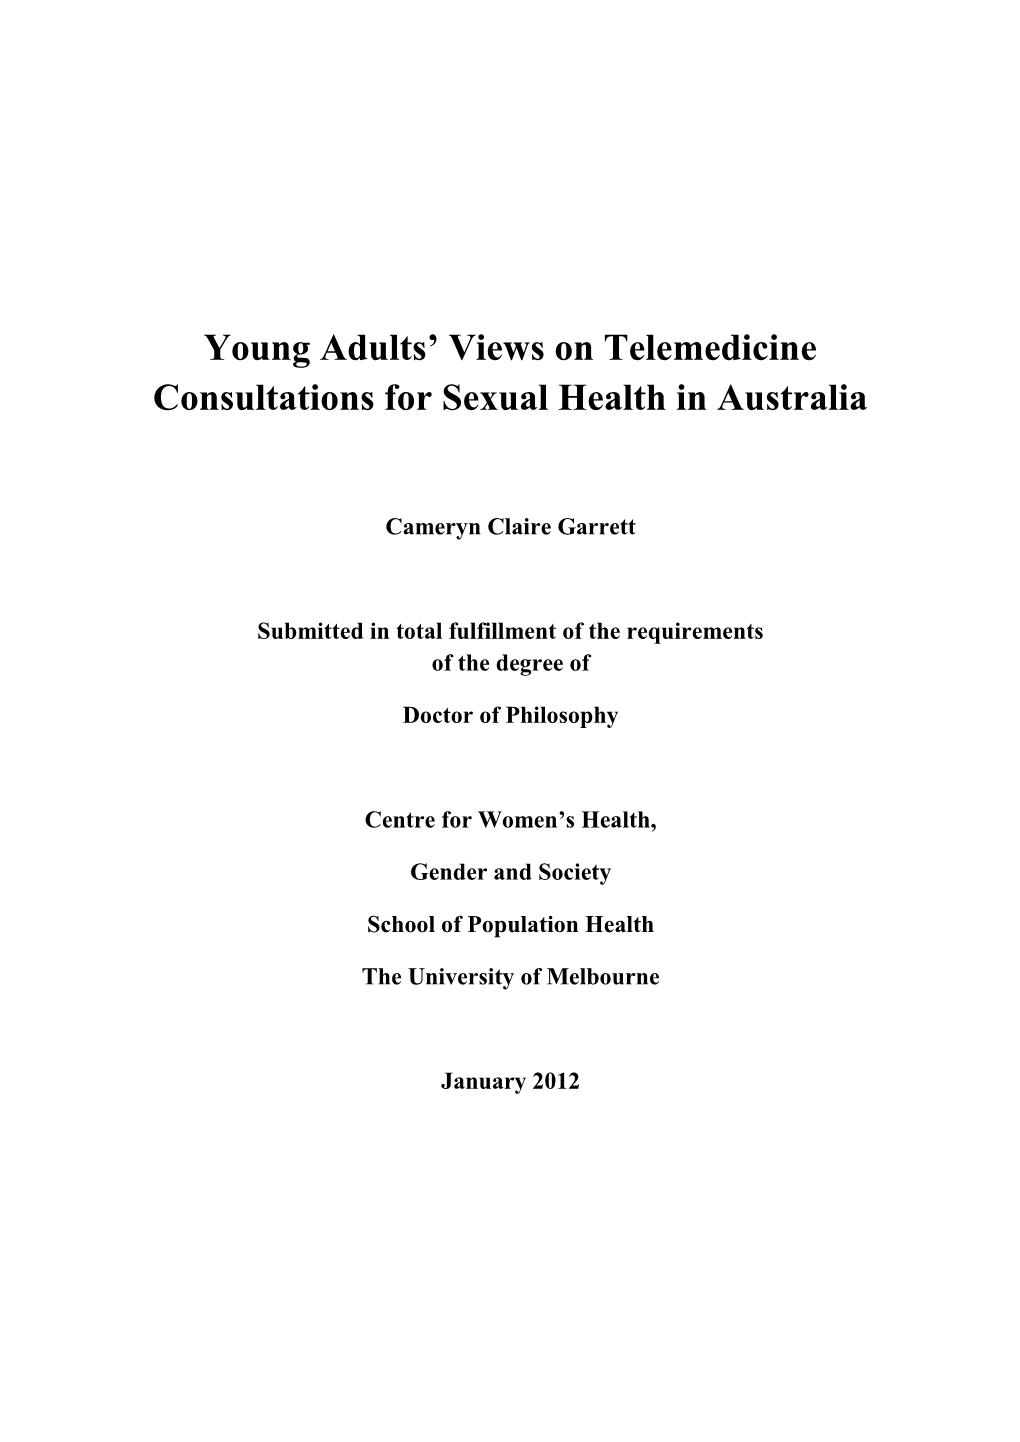 Young Adults' Views on Telemedicine Consultations for Sexual Health in Australia